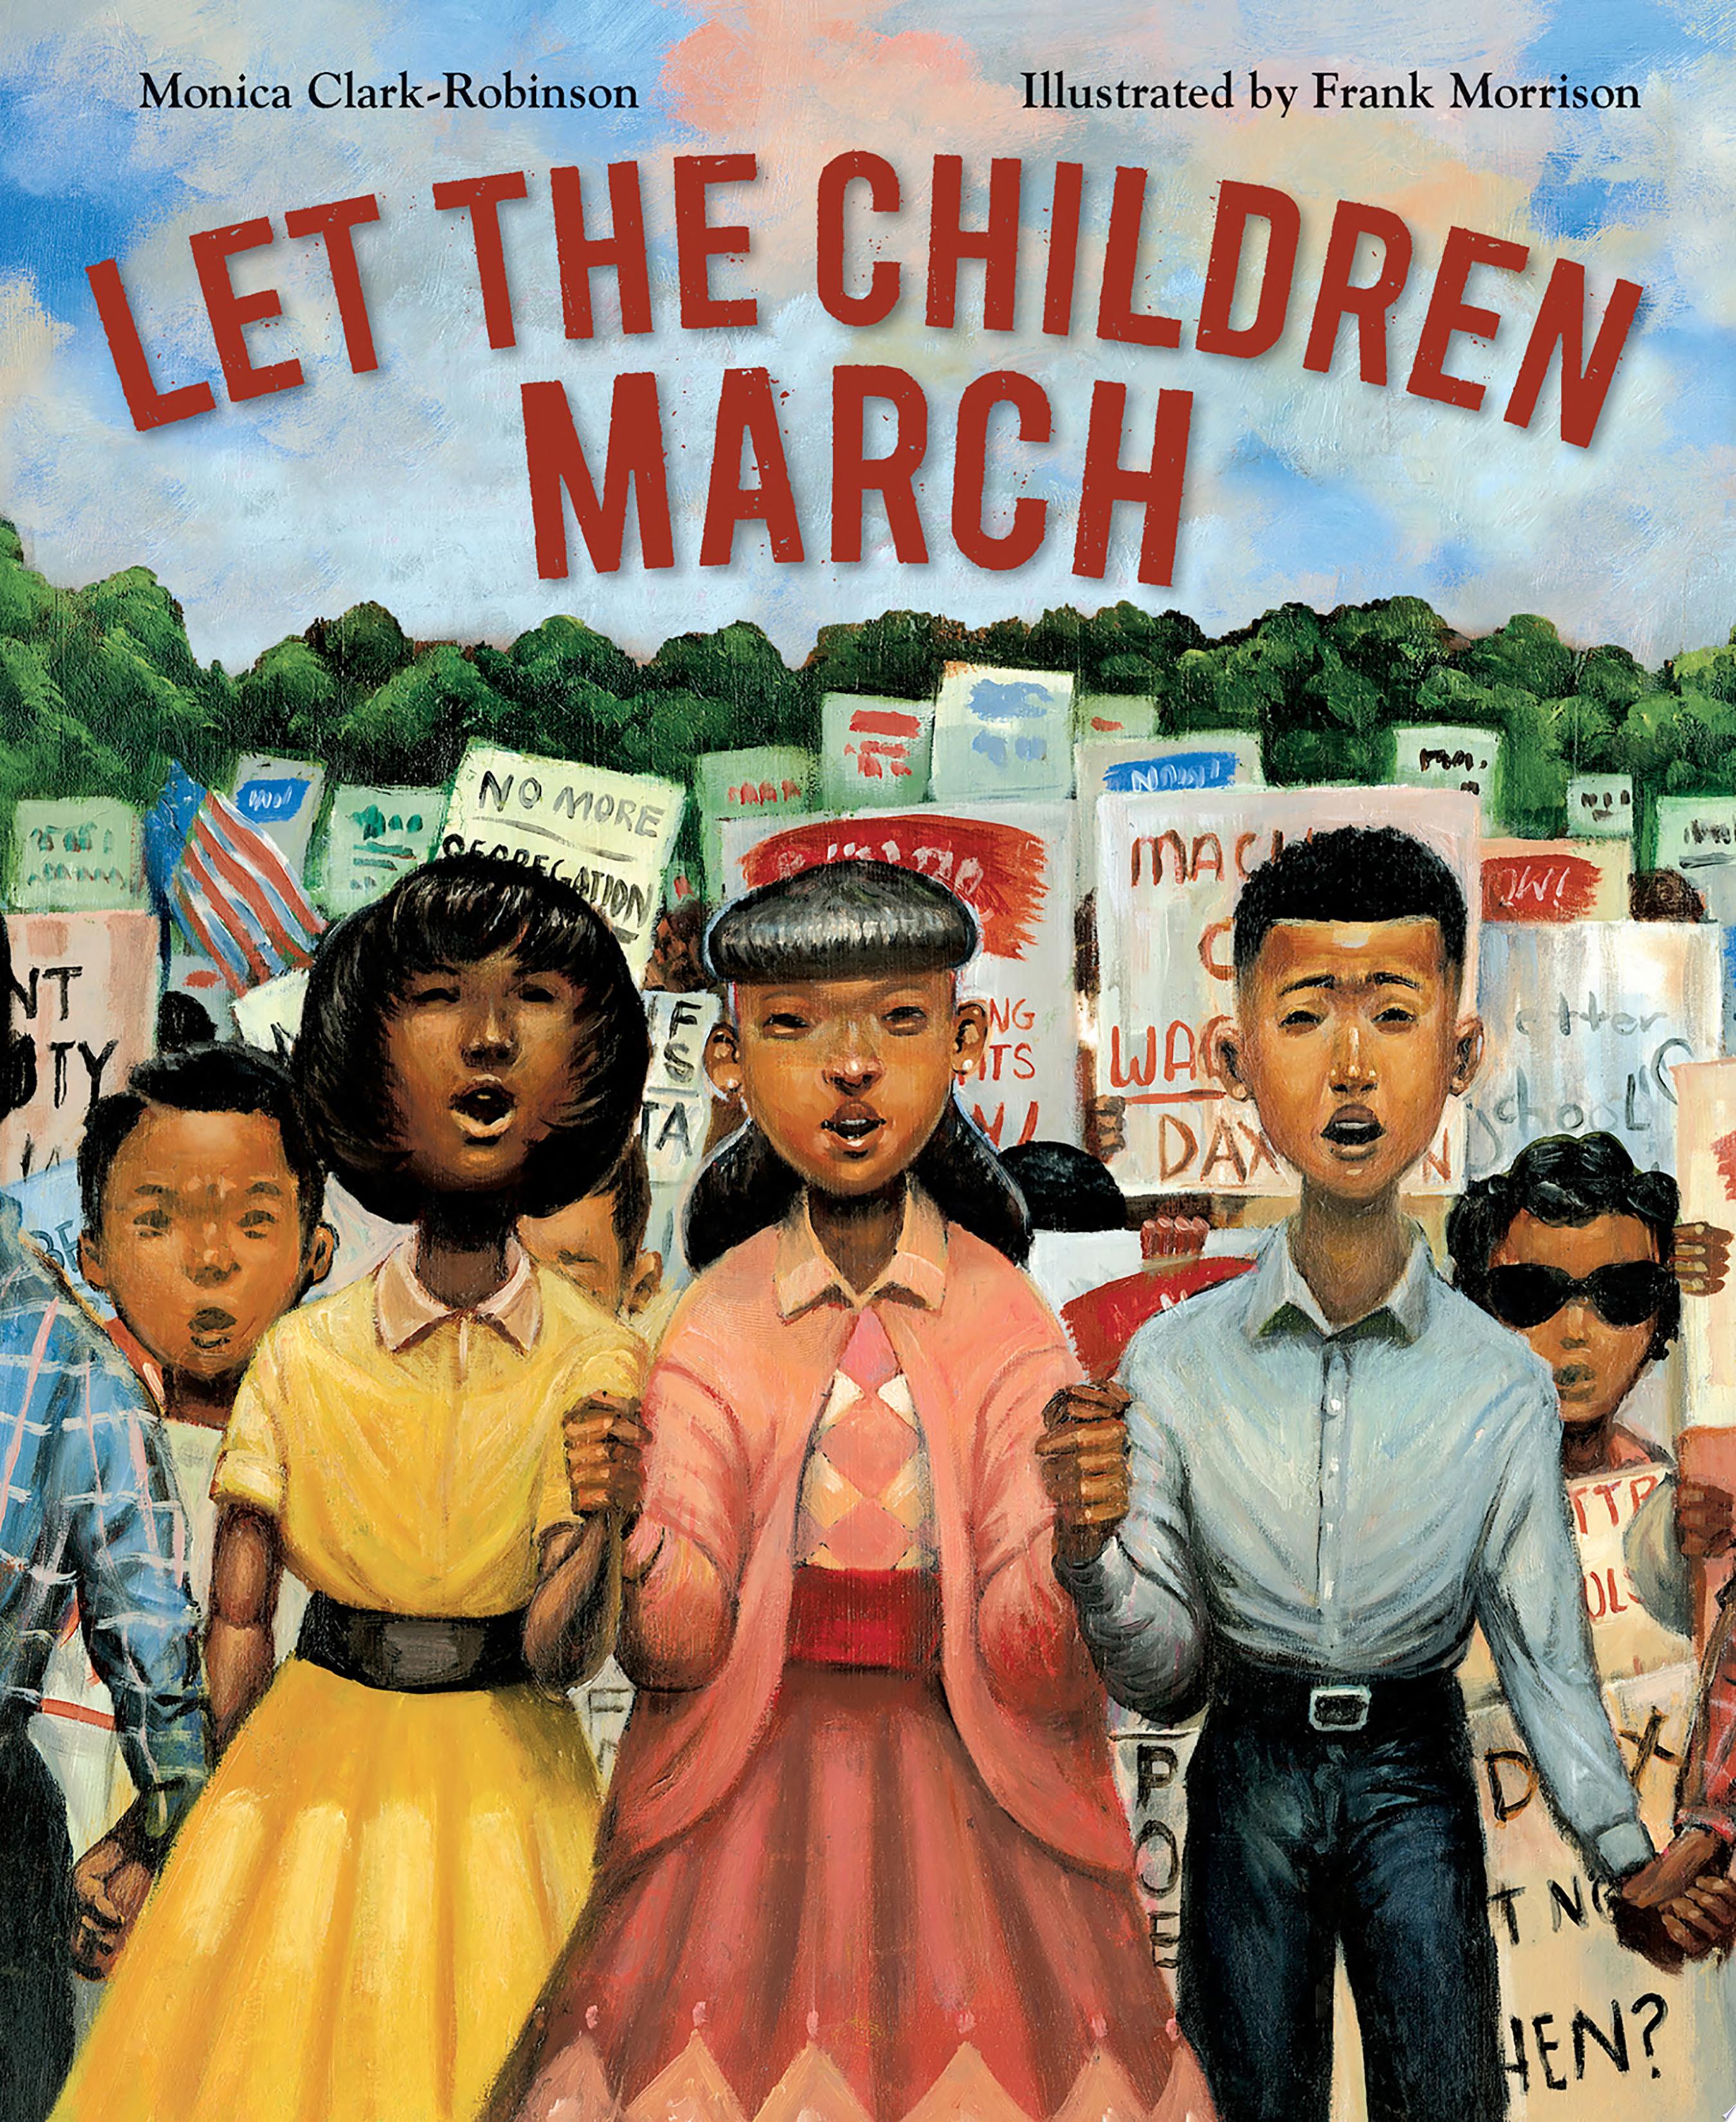 Image for "Let the Children March"